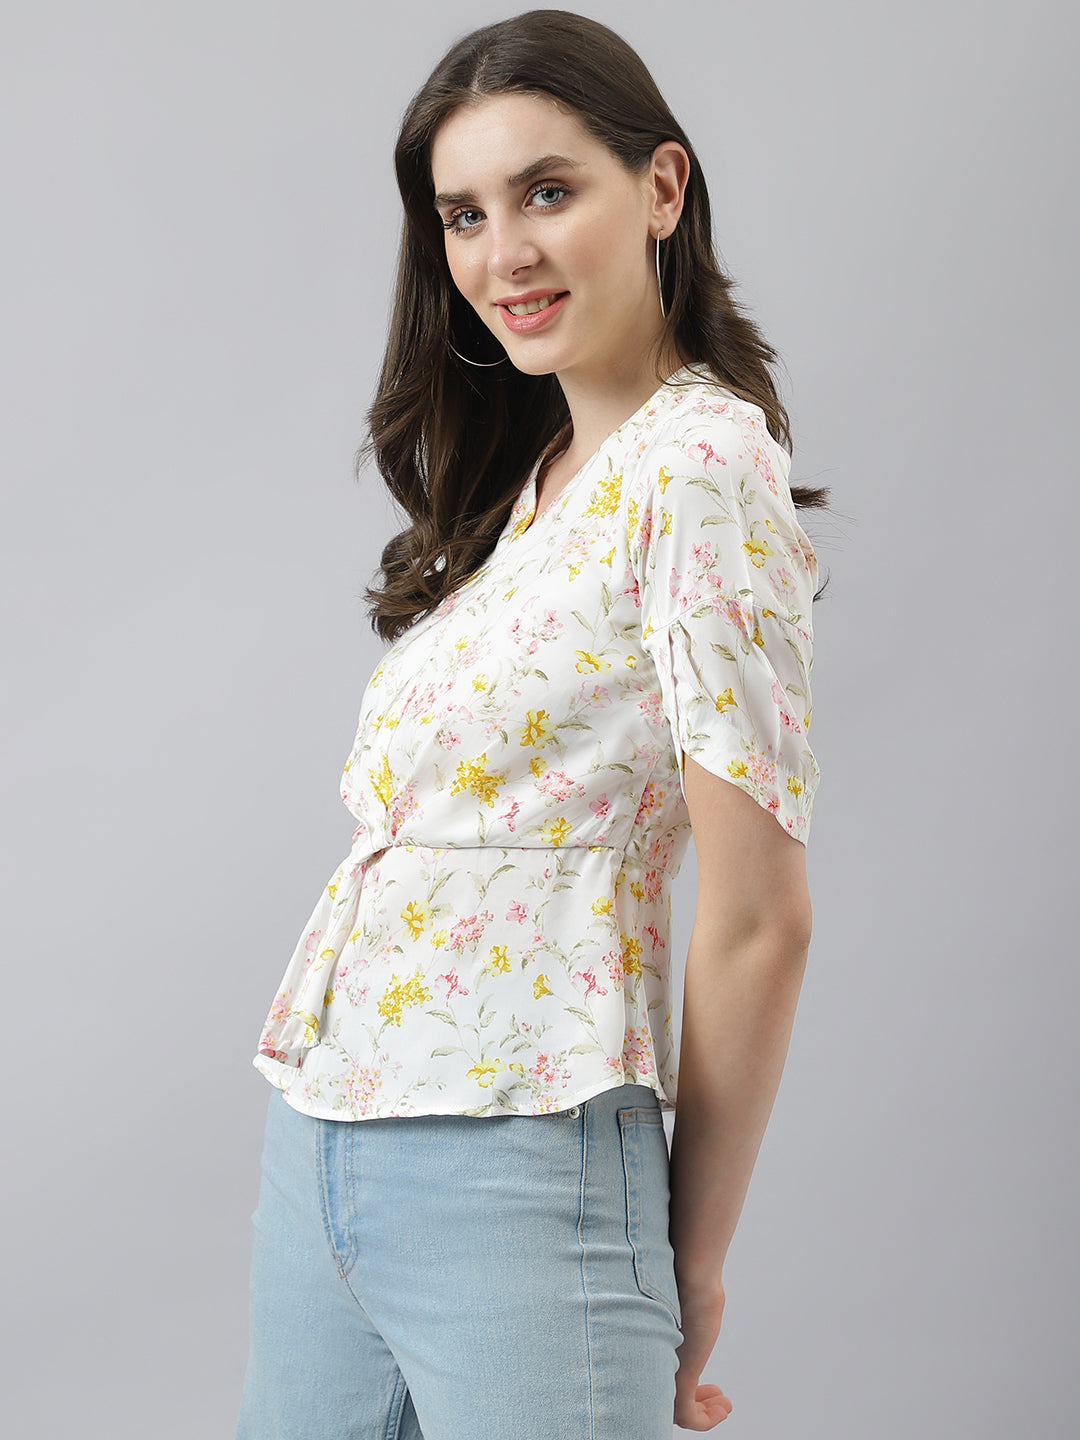 Ivory Floral Print Peplum Top With Puffer Sleeves & V Neckline